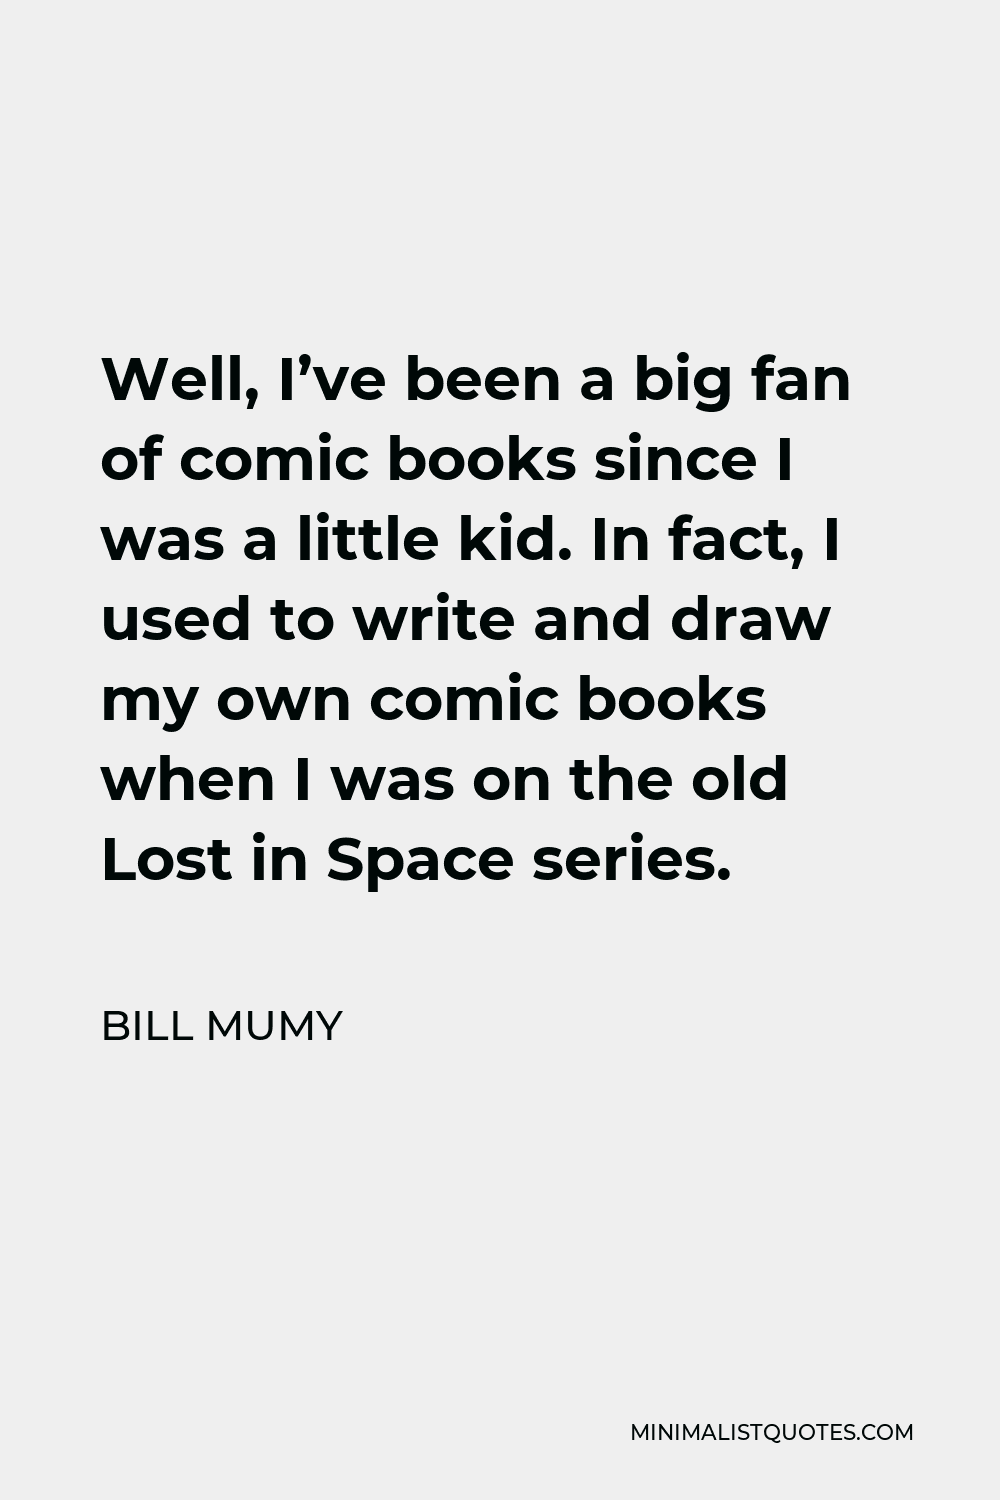 Bill Mumy Quote - Well, I’ve been a big fan of comic books since I was a little kid. In fact, I used to write and draw my own comic books when I was on the old Lost in Space series.